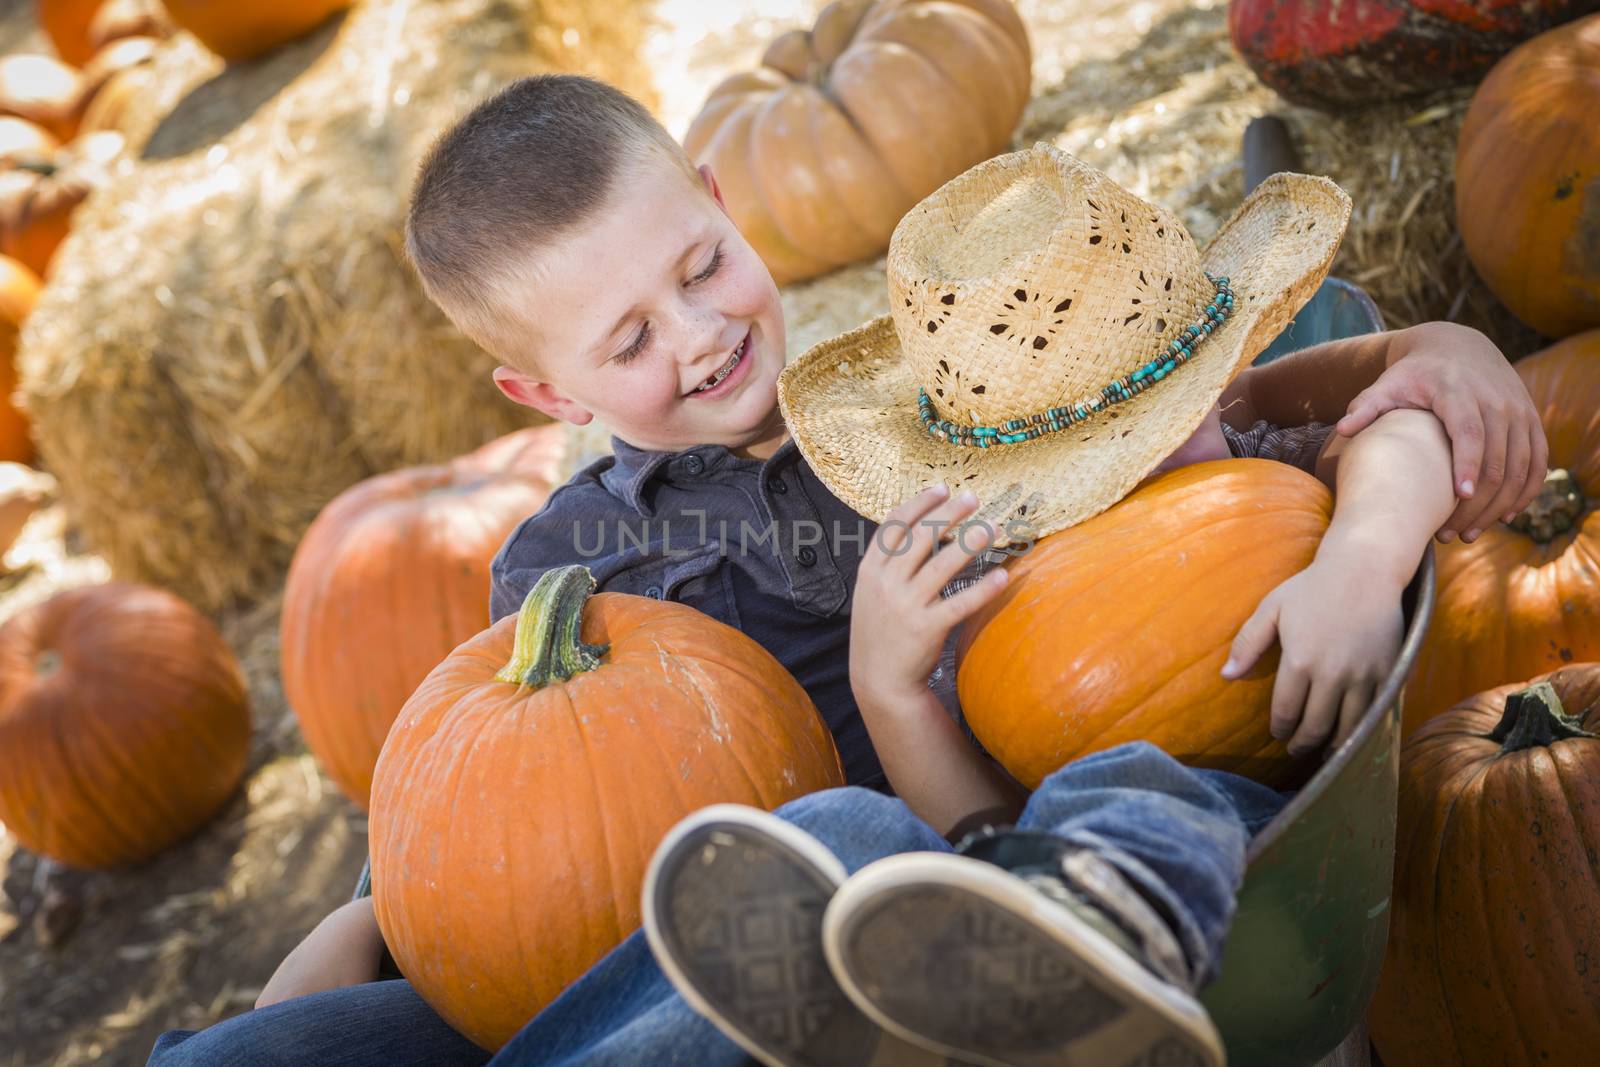 Two Little Boys Playing in Wheelbarrow at the Pumpkin Patch by Feverpitched